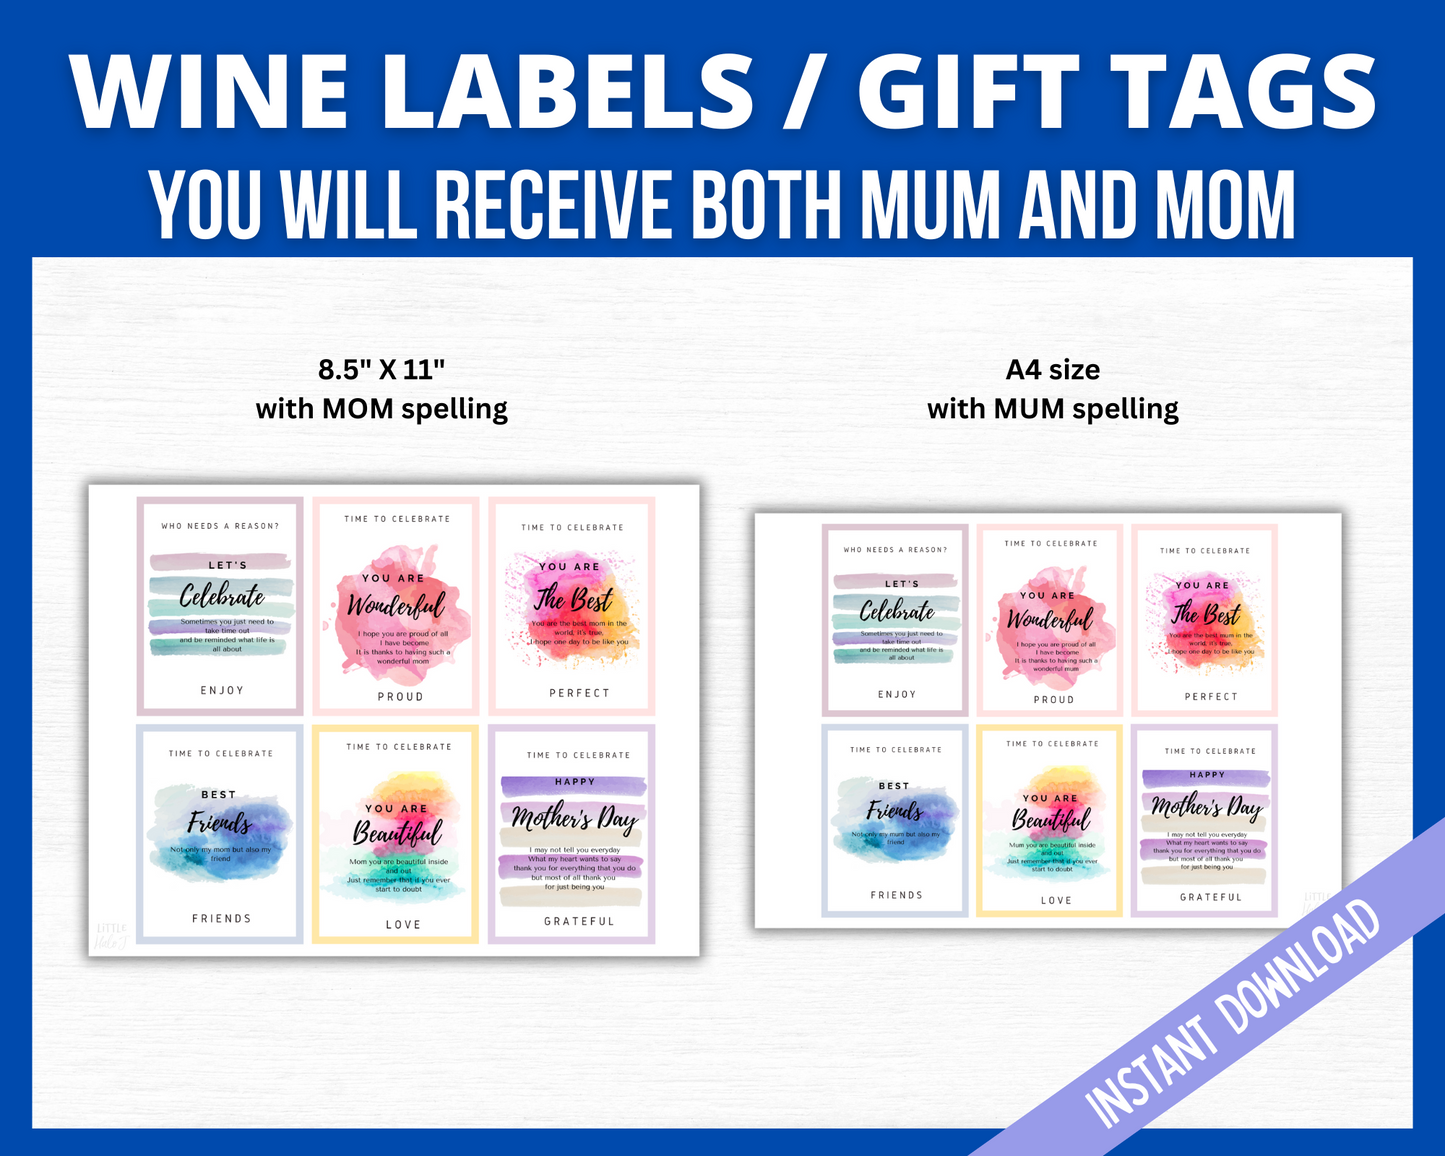 Mothers day printable gift tags and wine labels